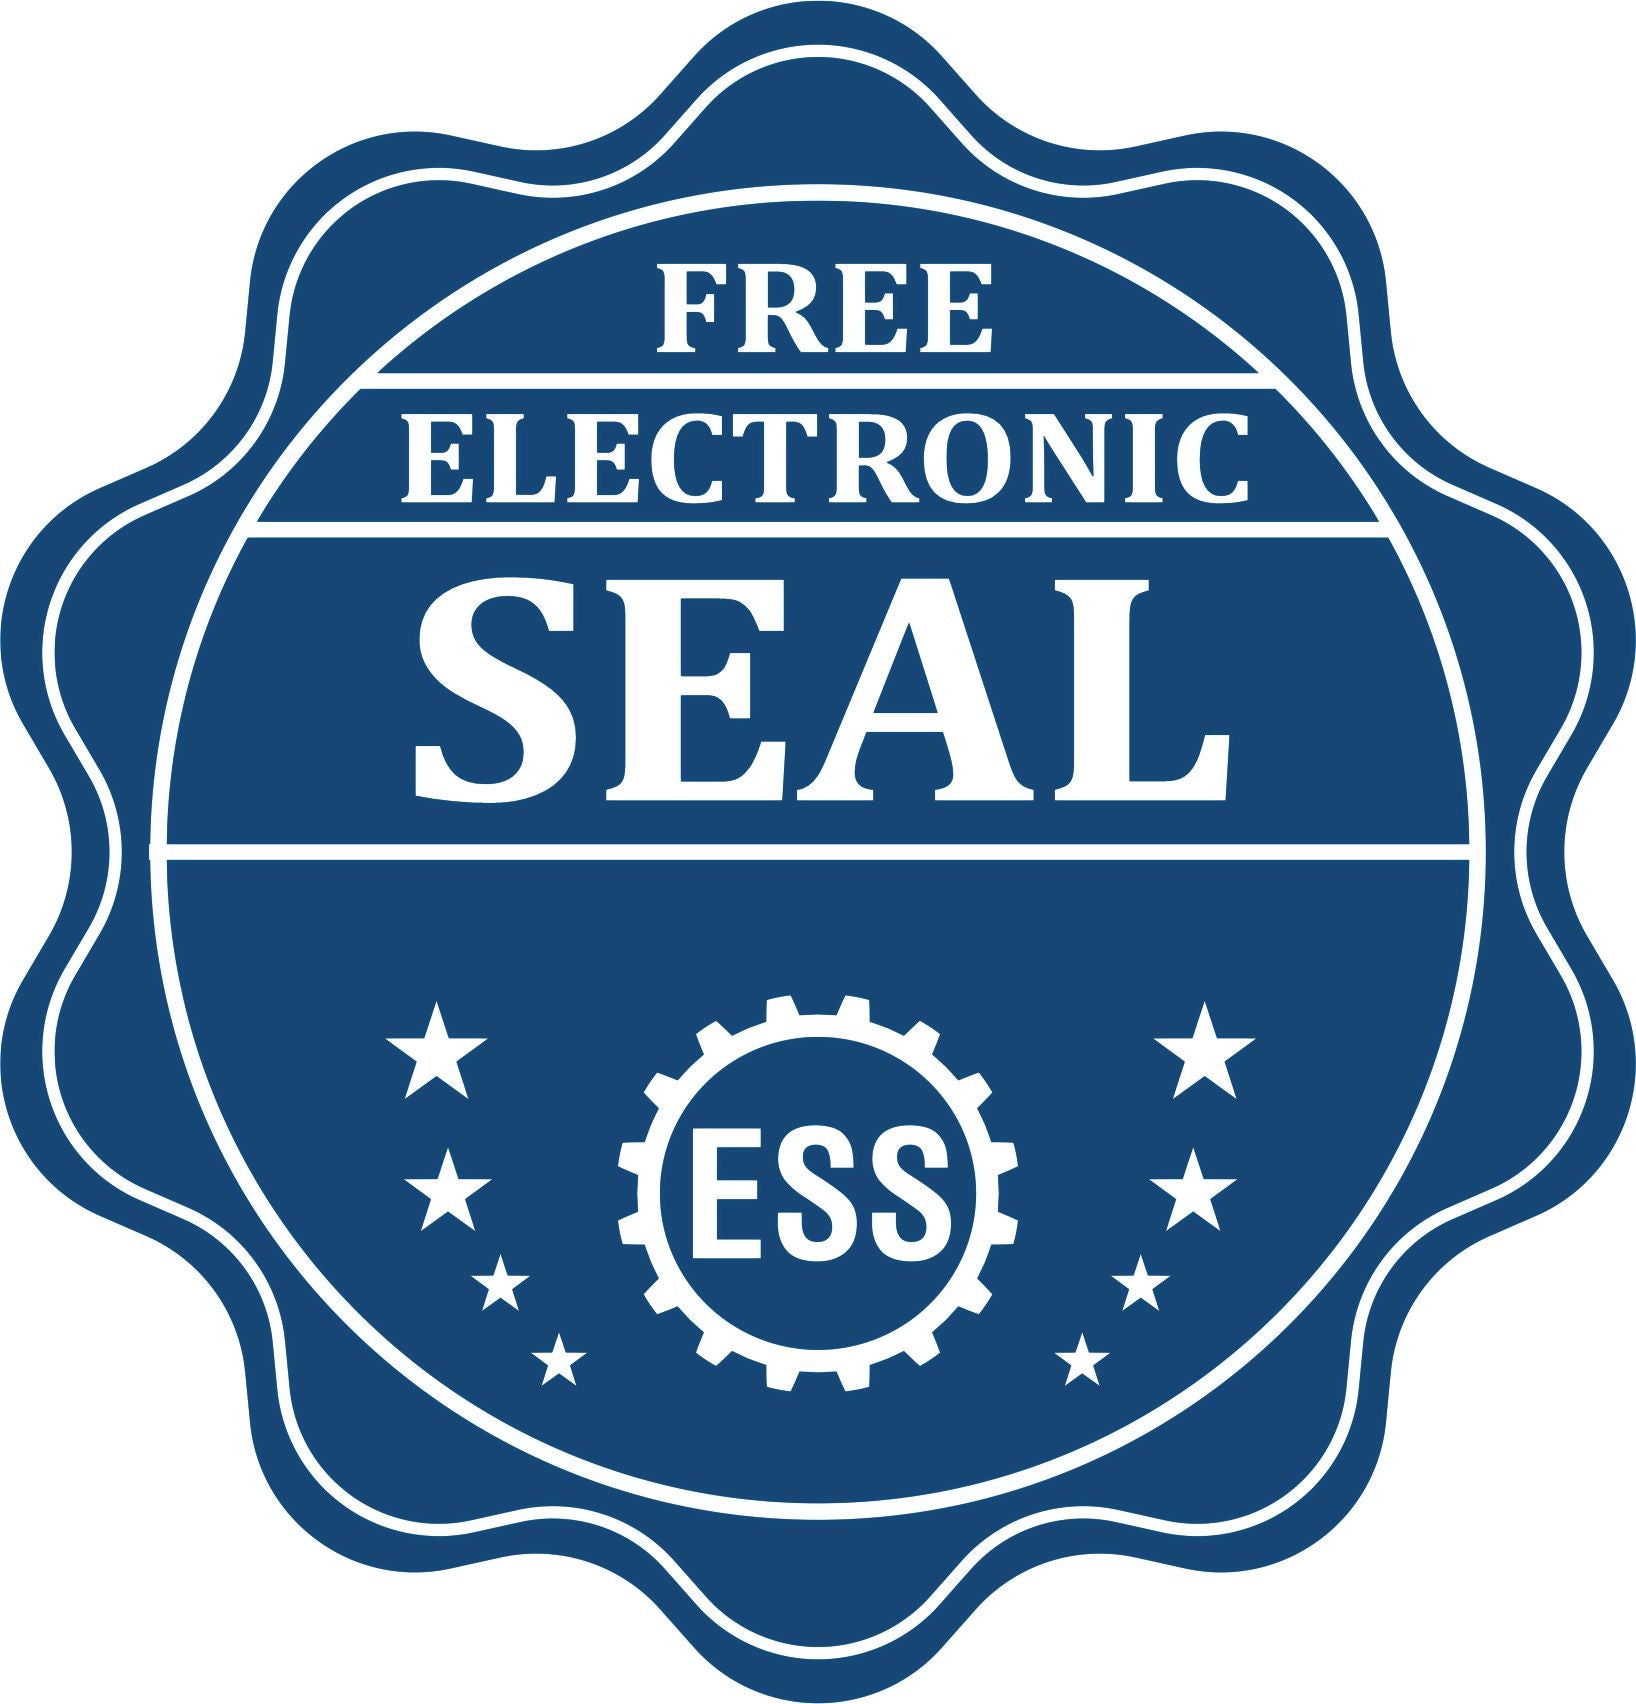 A badge showing a free electronic seal for the Hybrid Maryland Landscape Architect Seal with stars and the ESS gear on the emblem.